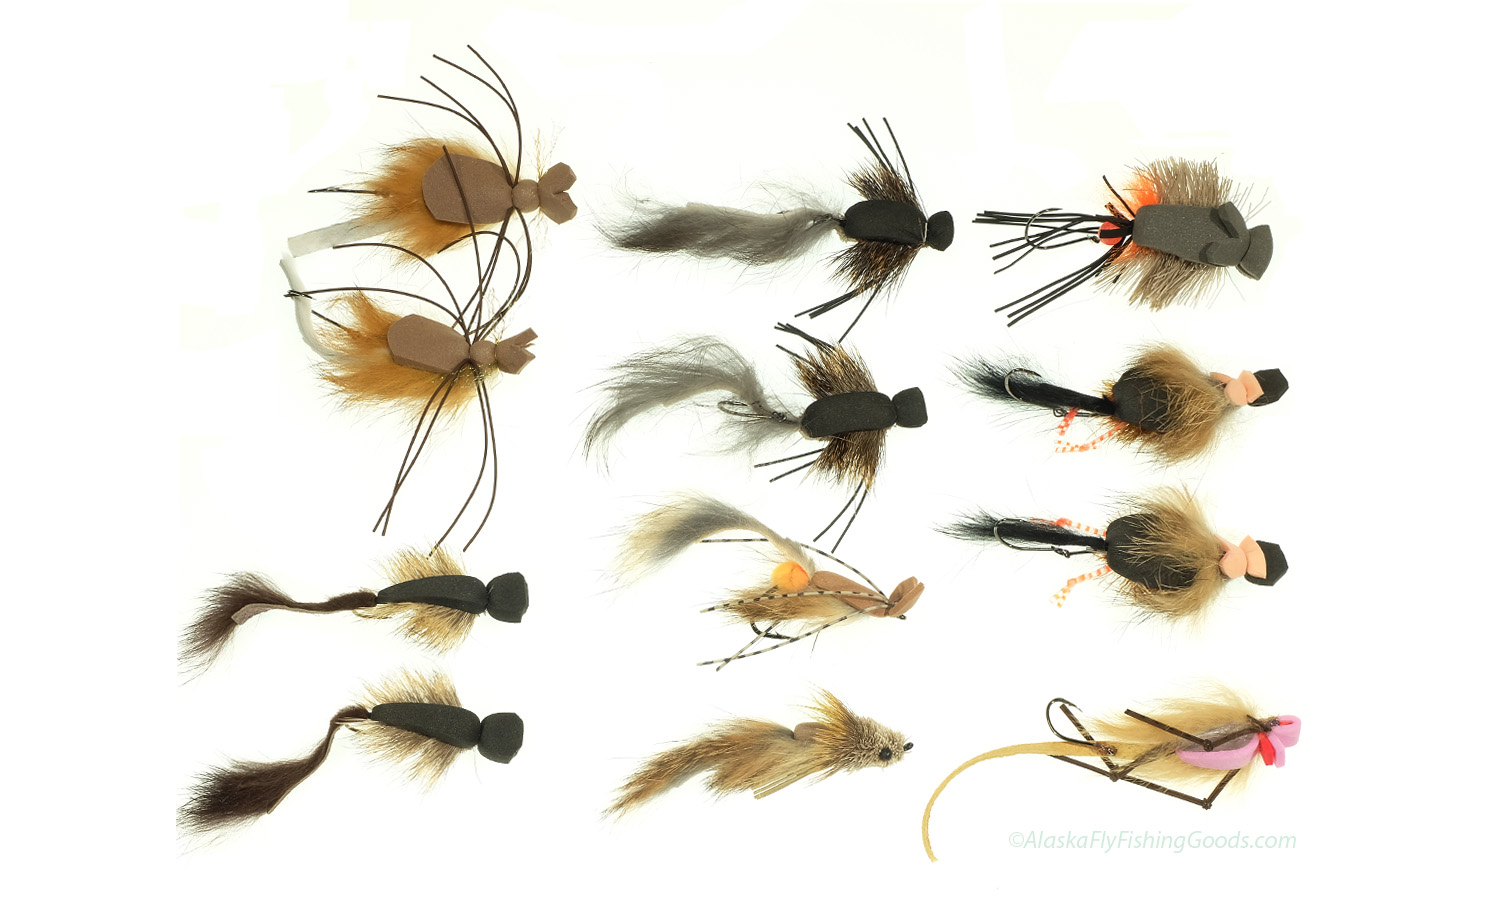 Feathers and Hackle - Fly Tying - Alaska Fly Fishing Goods